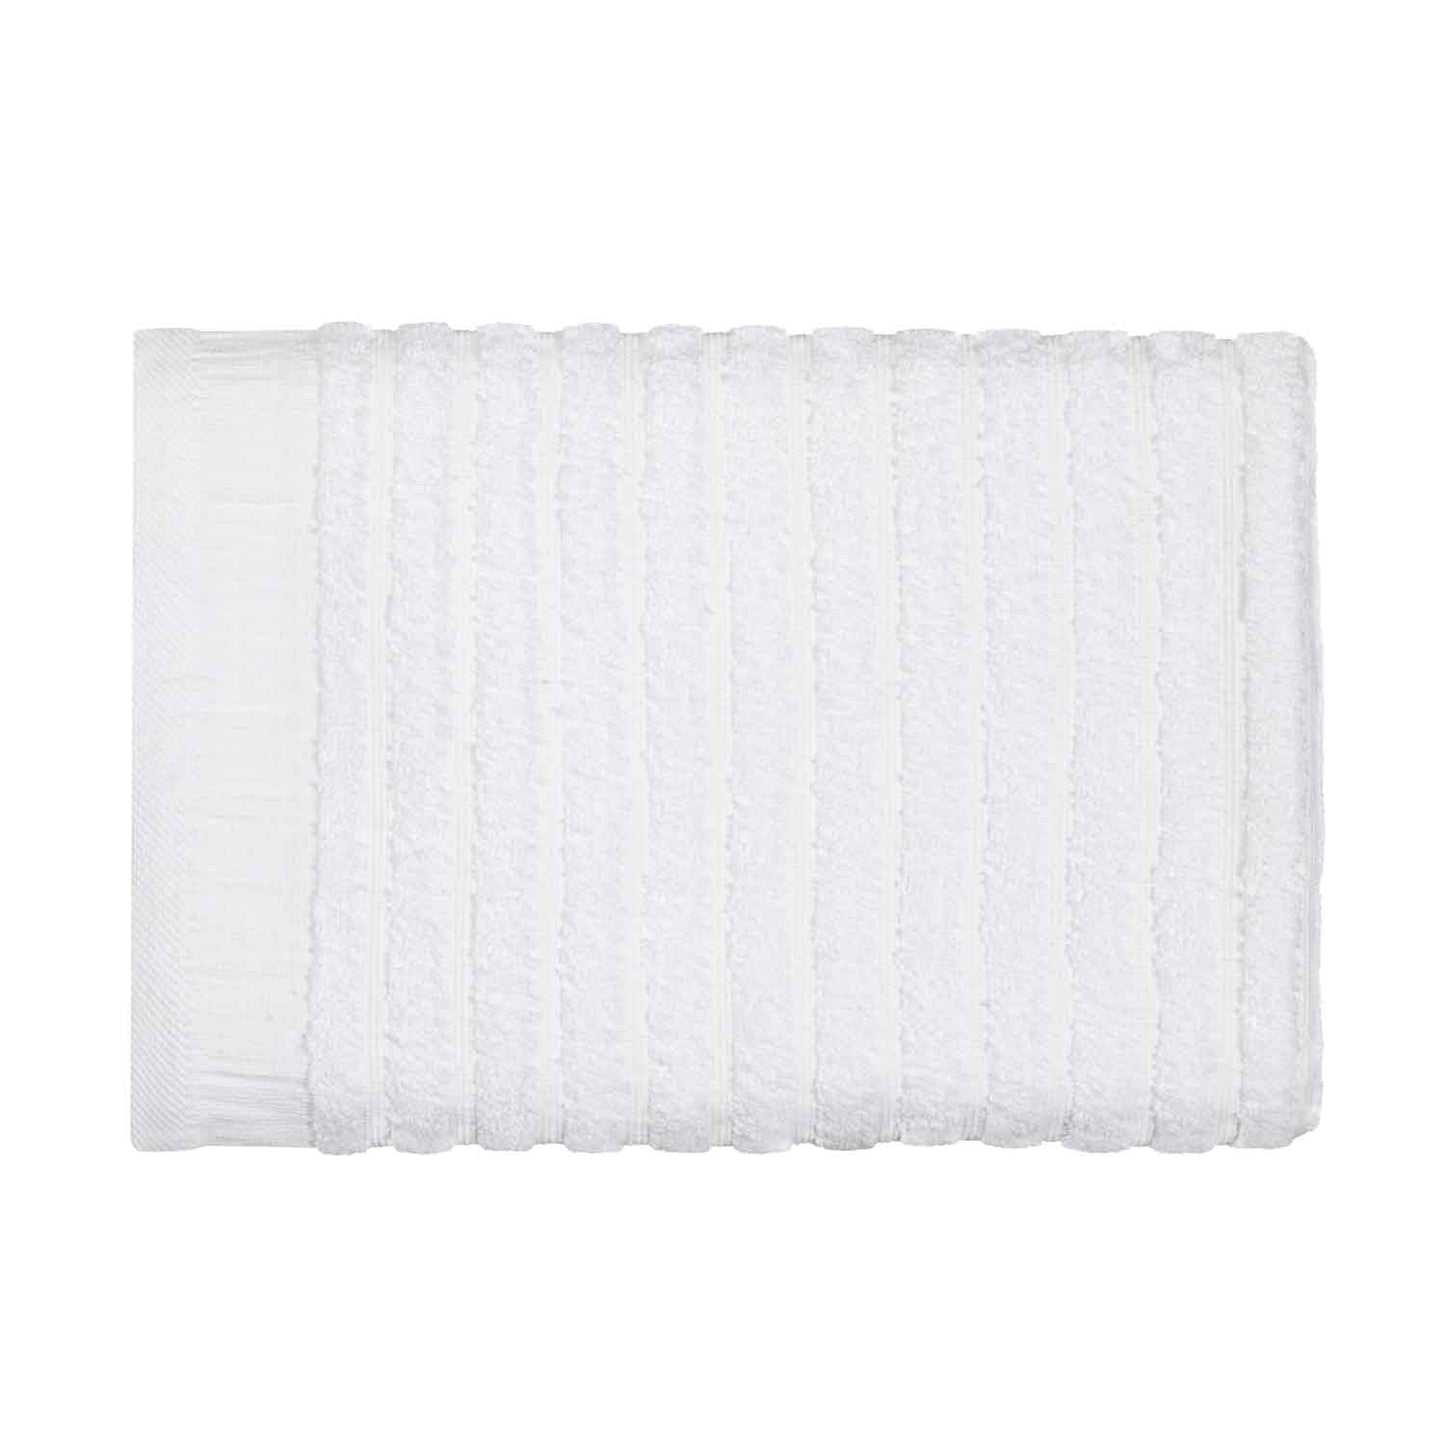 American Dawn | 24X50 Inch Pismo White Textured Hotel Towel | Pool Towel 